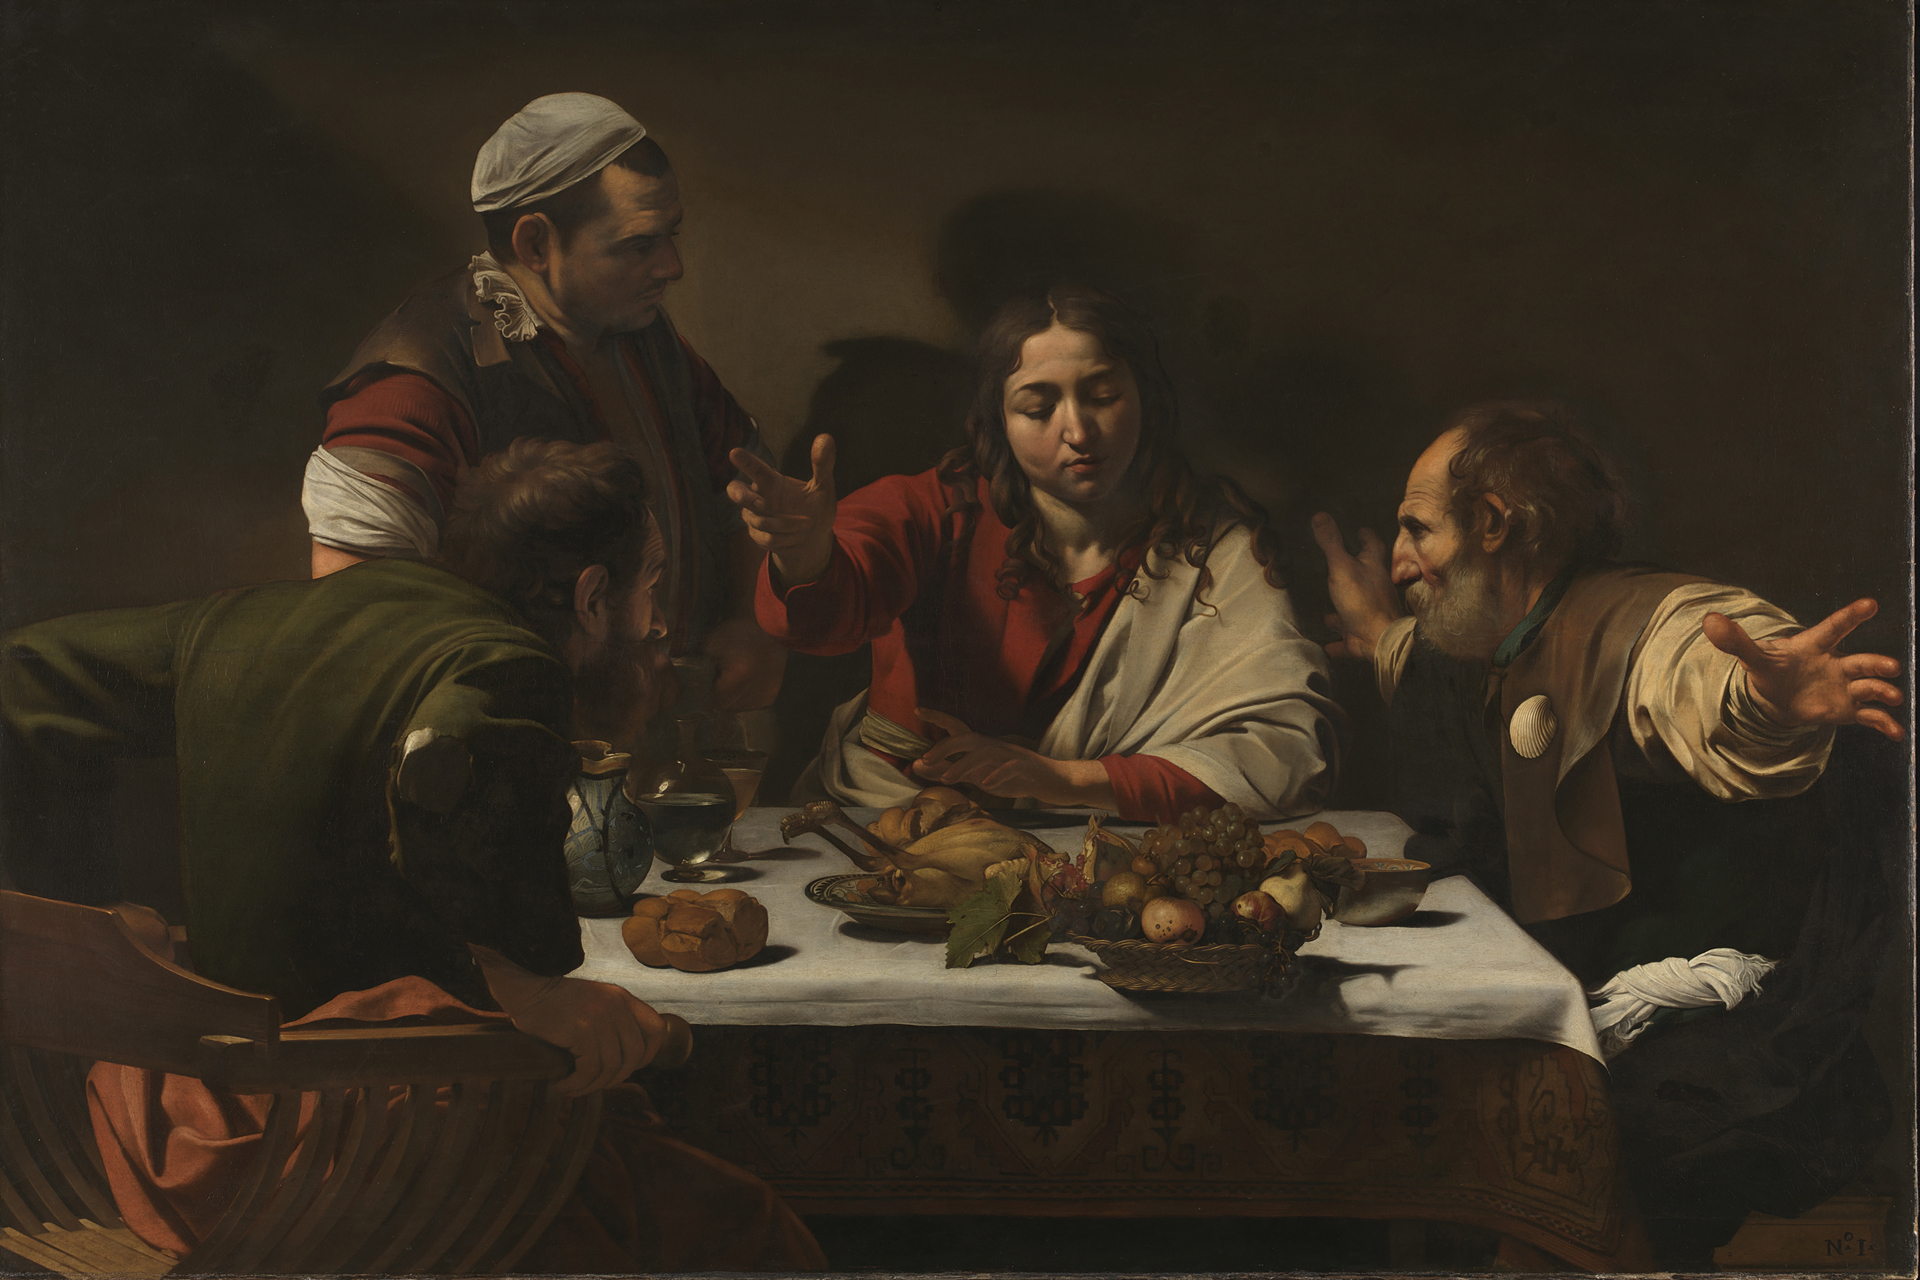 Caravaggio’s The Supper at Emmaus